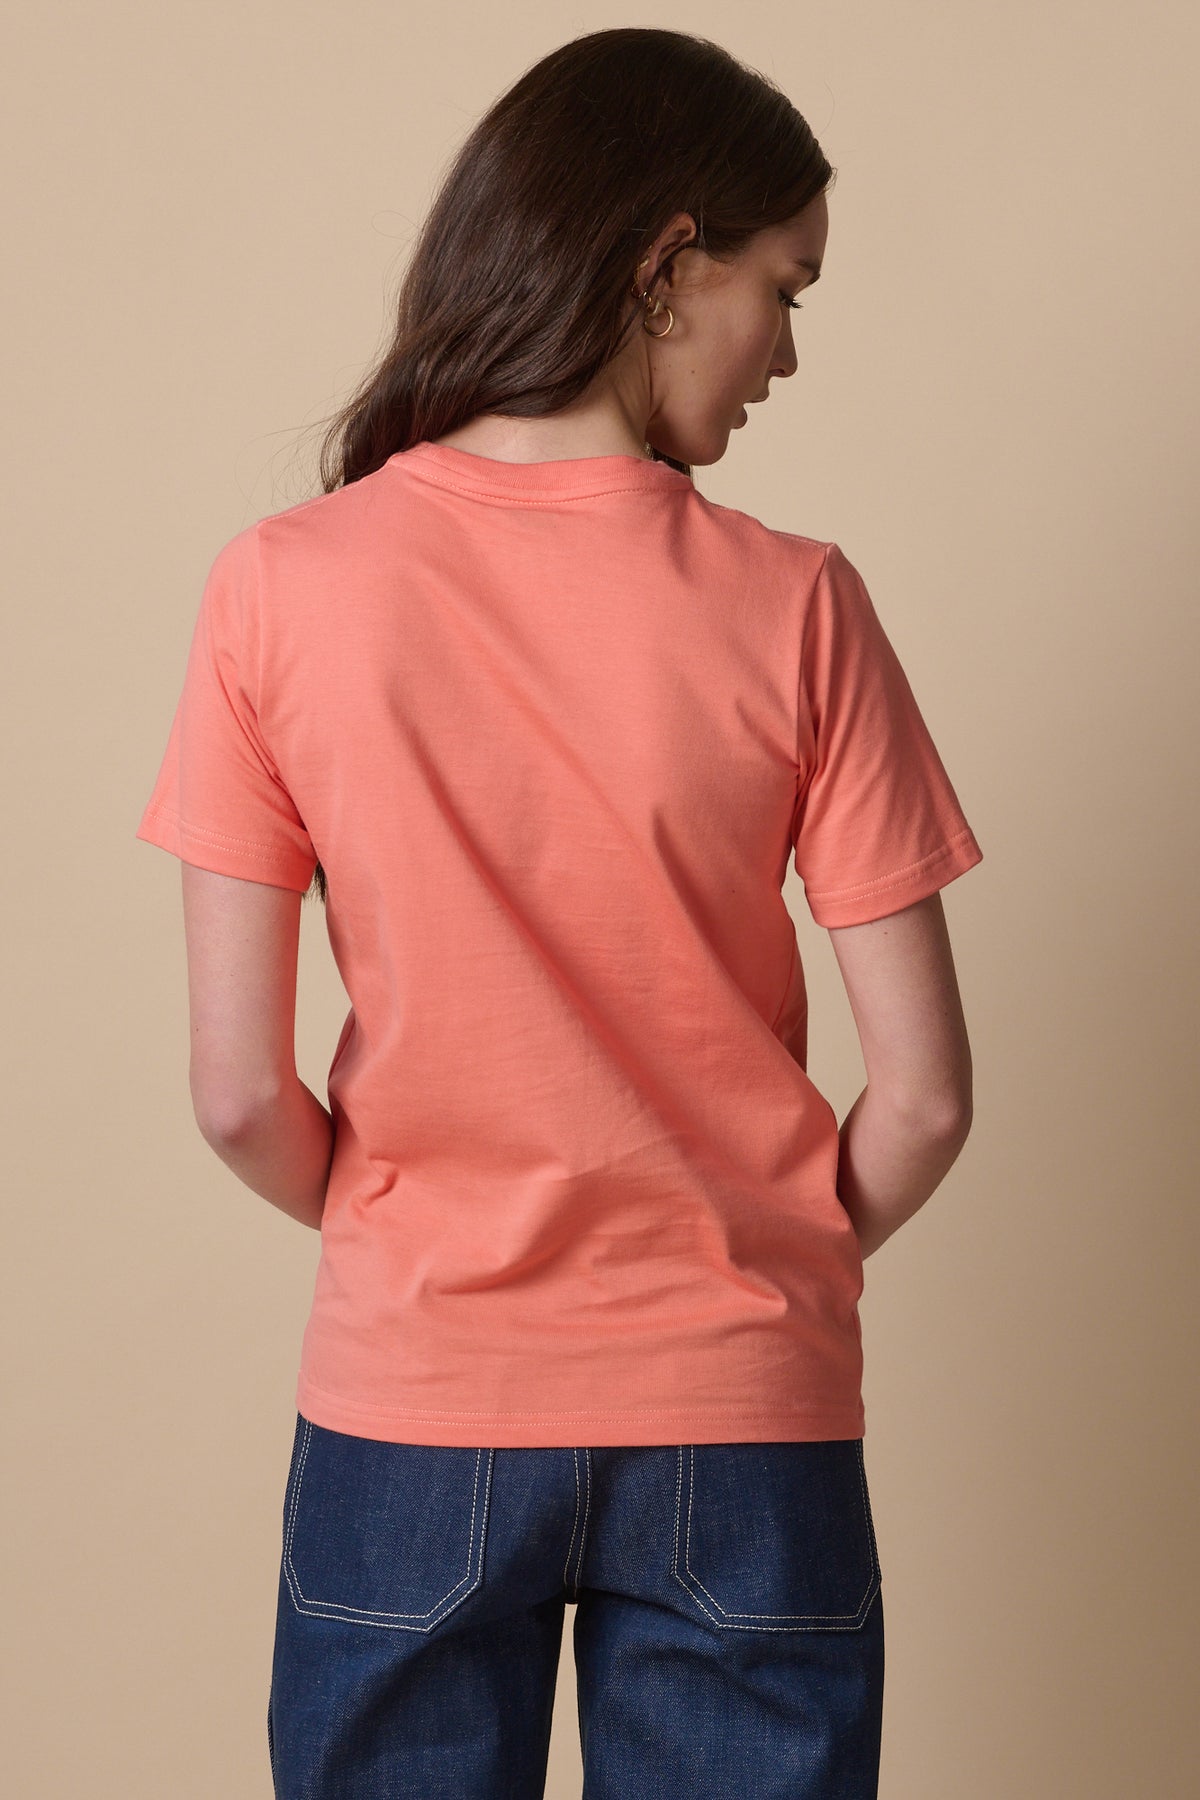 
            Back of female wearing short sleeve t shirt in peach